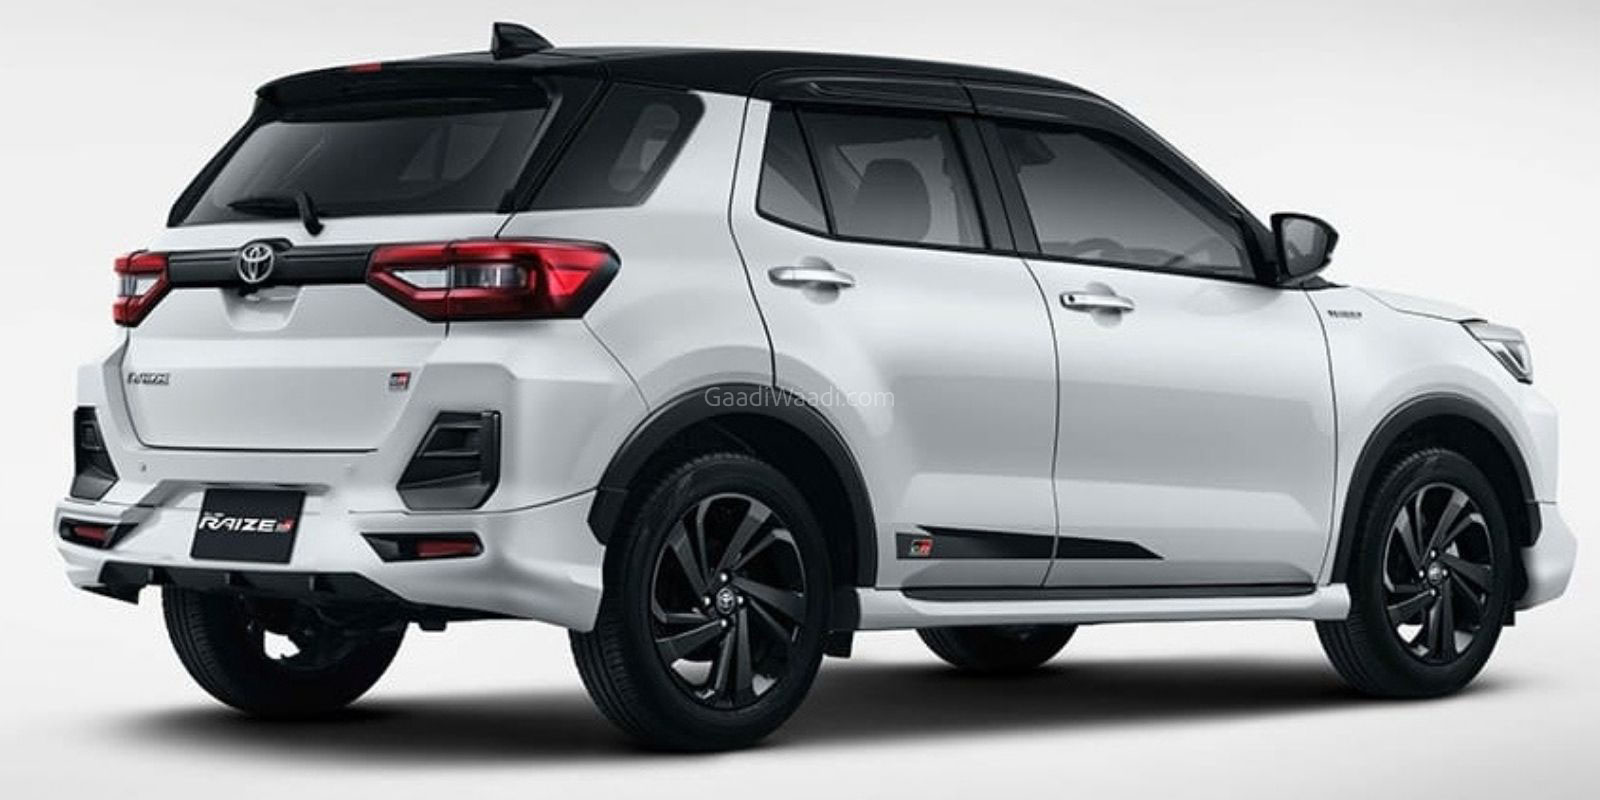 Toyota Raize Compact SUV Launched With GR Sport Variant